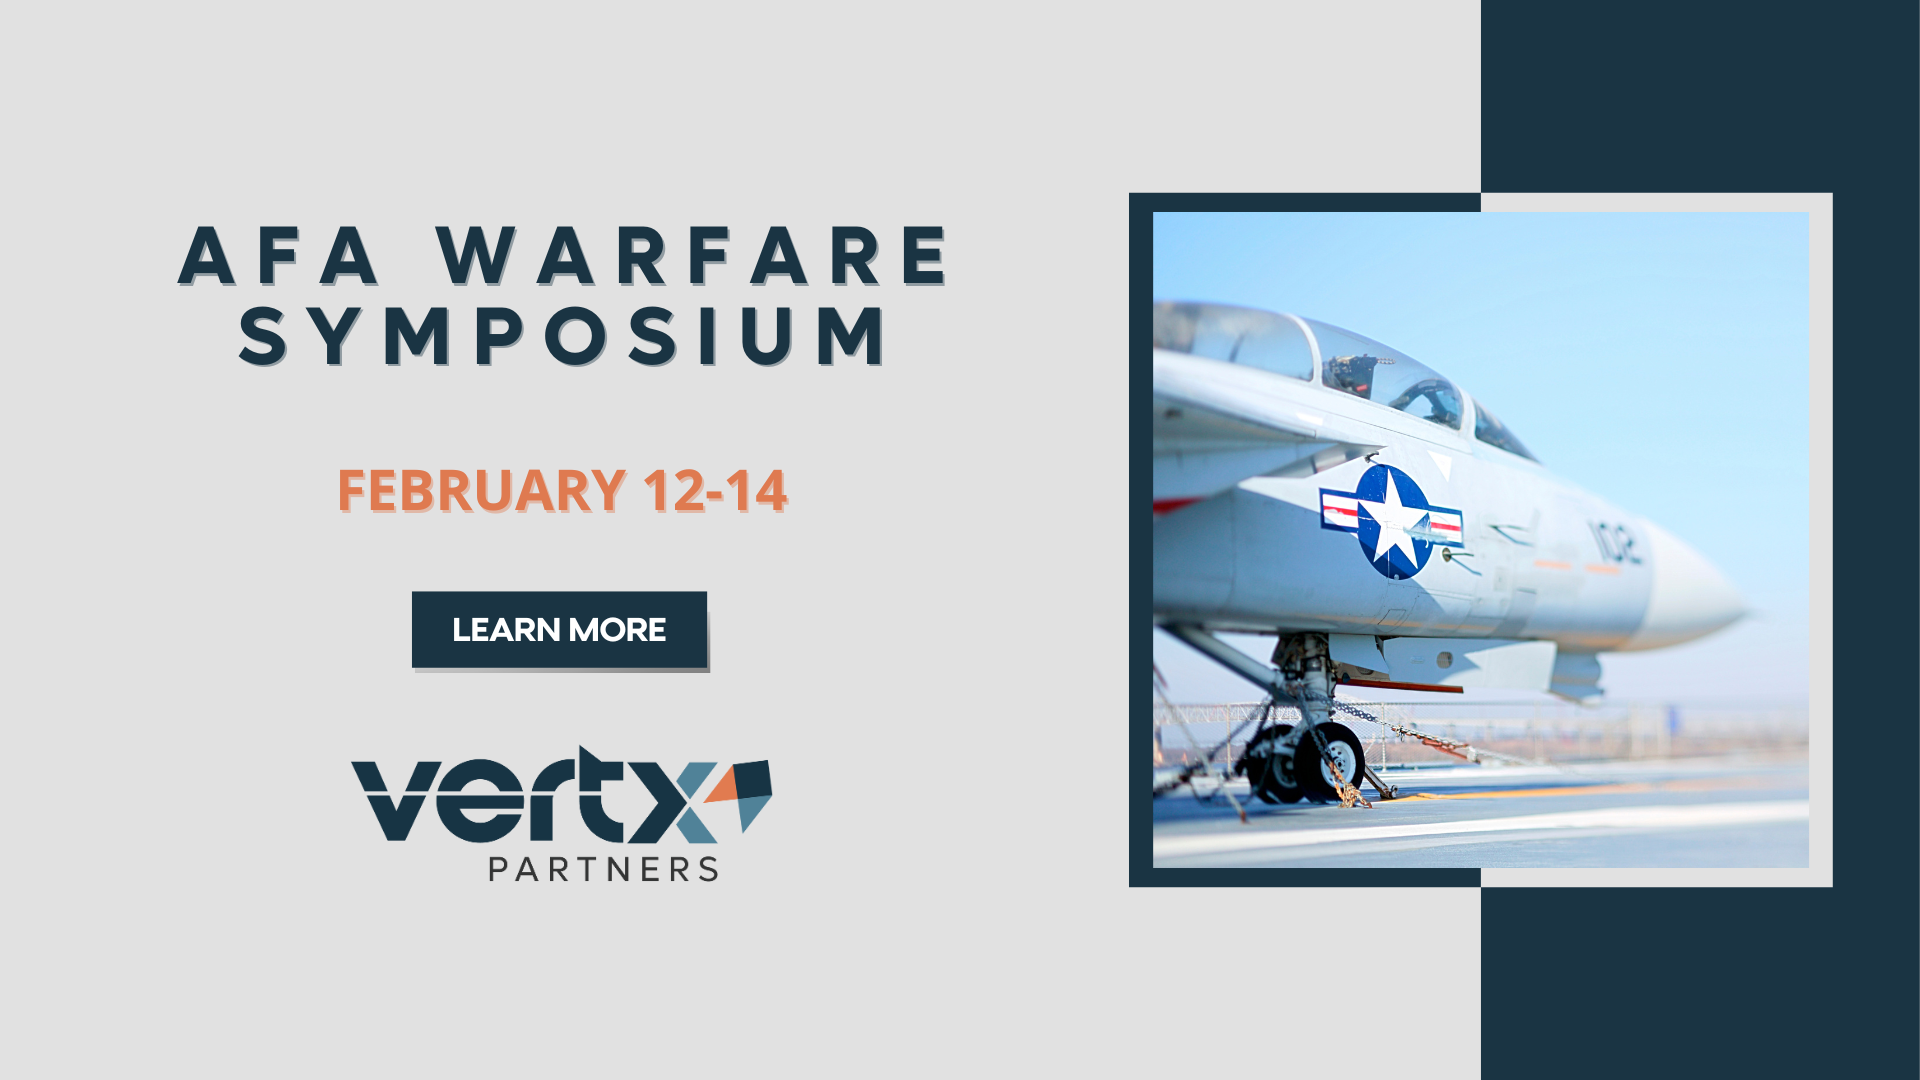 This has the title "AFA Warfare Symposium" with the date february 12-14th under it and a photo of a fighter jet on the ground with a blue sky in the background behind it.